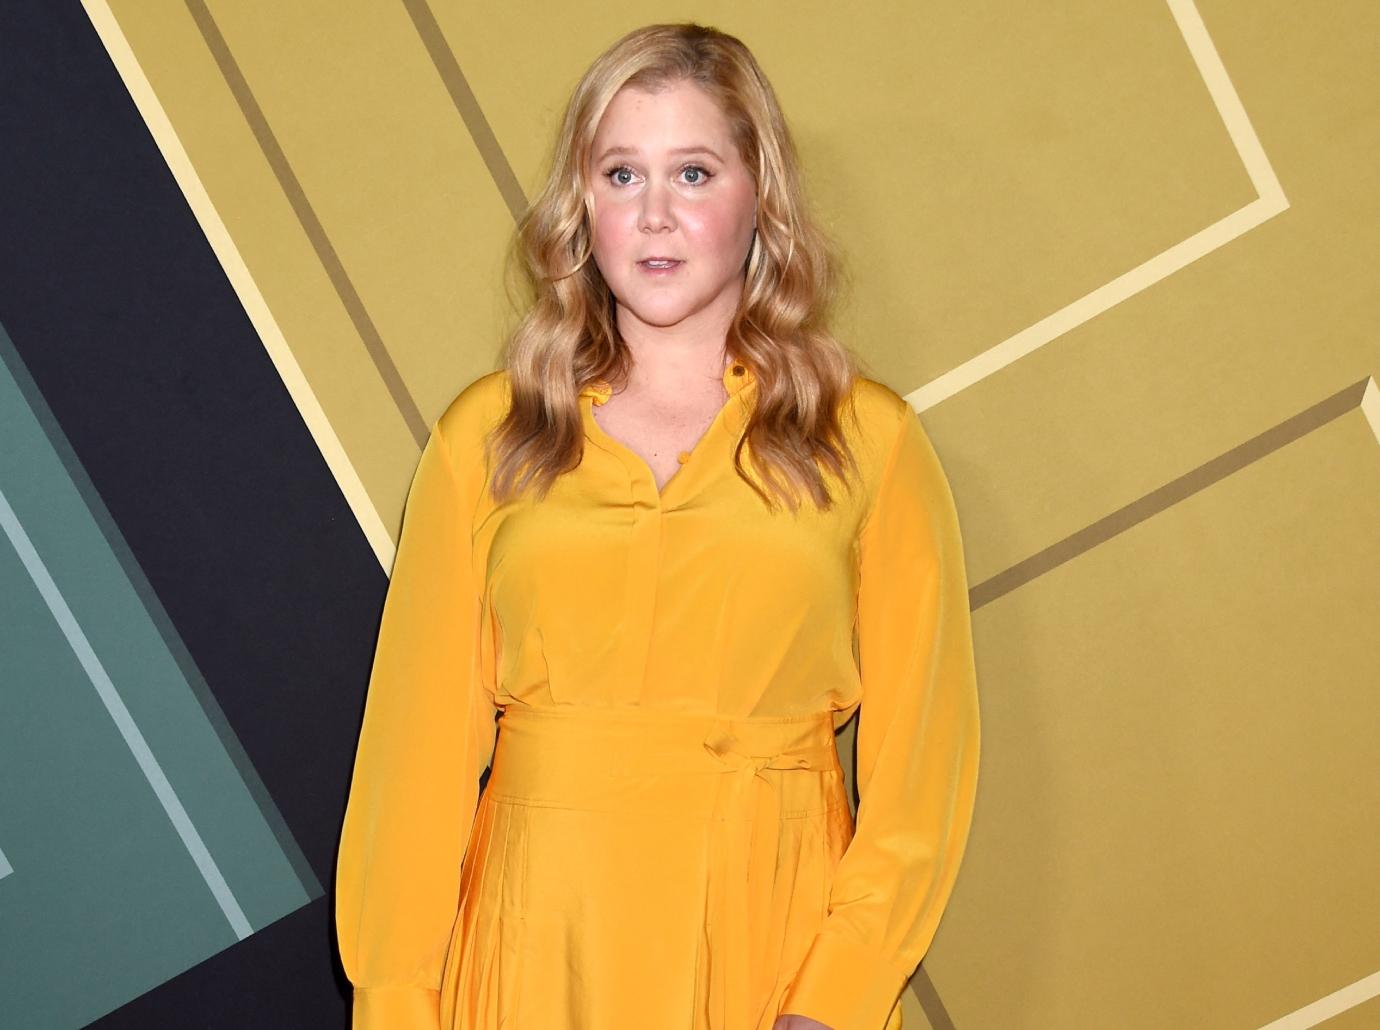 Amy Schumer Claims Haters Are 'Mad' She's Not 'Thinner' & 'Prettier'